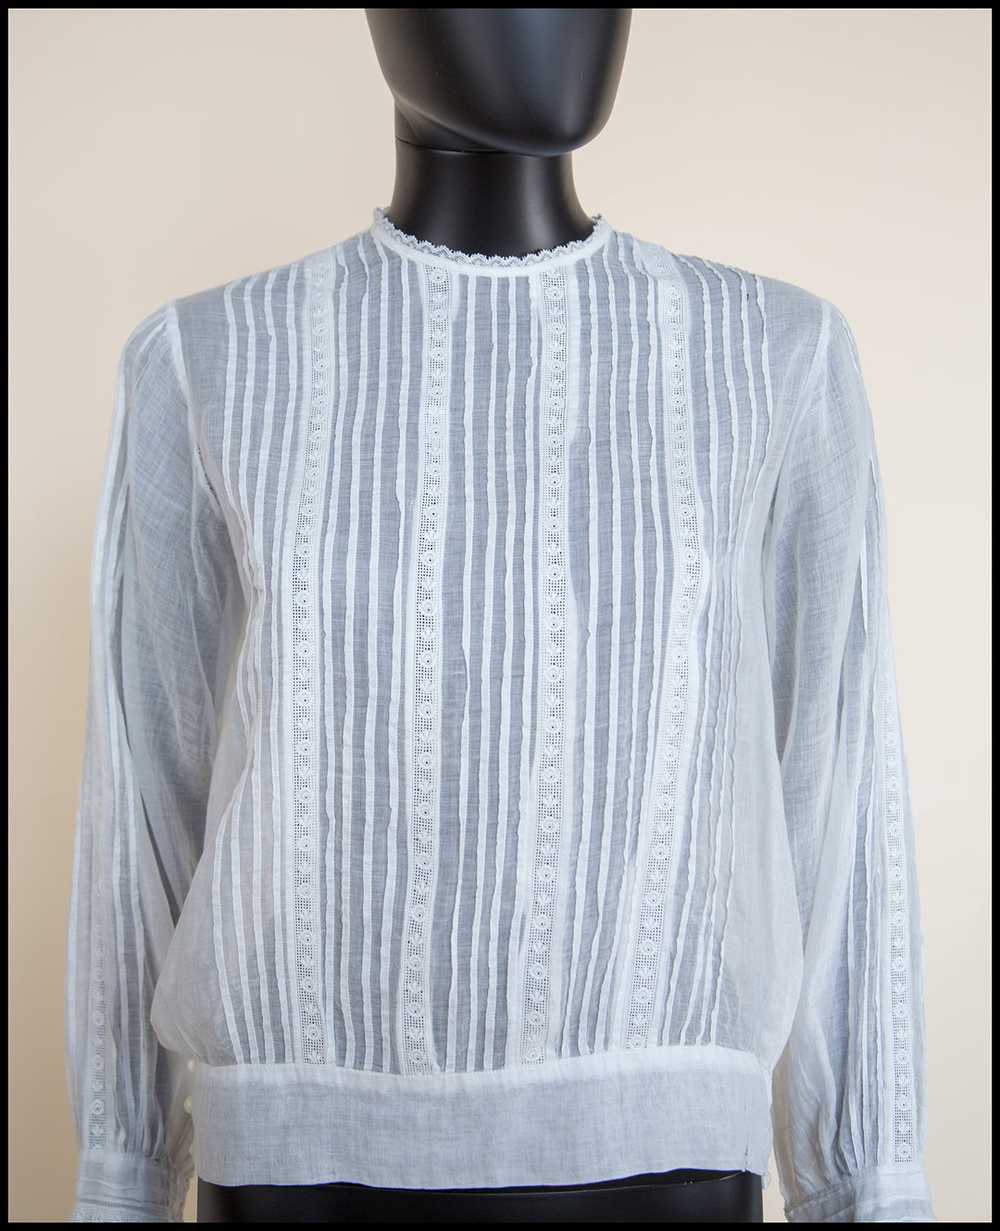 Vintage 1920s Embroidered White Cotton Blouse - image 10